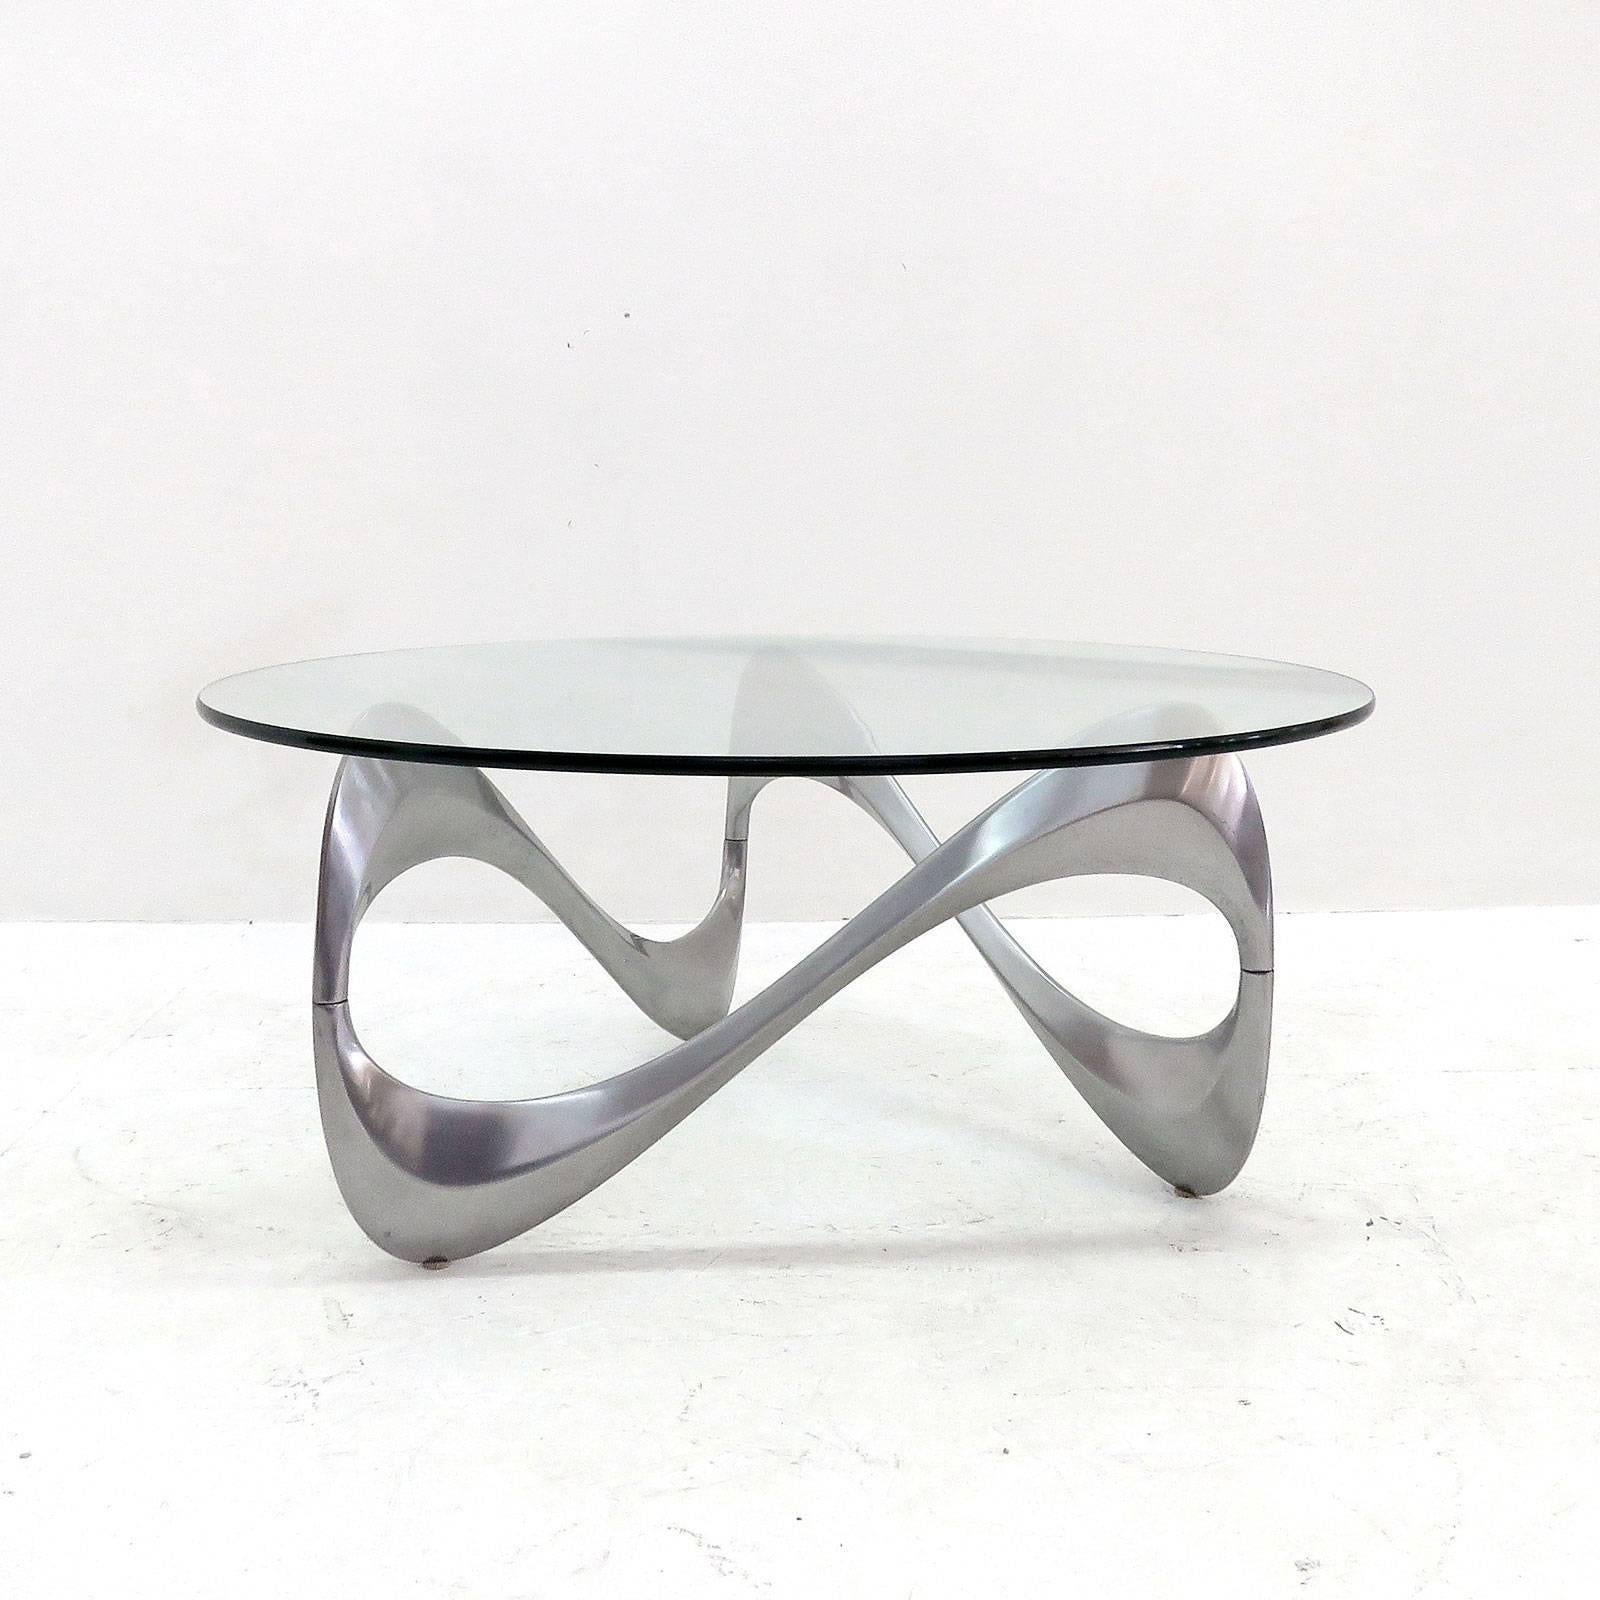 Rare sculptural three-piece aluminium "Schlangentisch" [snake table] coffee table with 40" glass top.